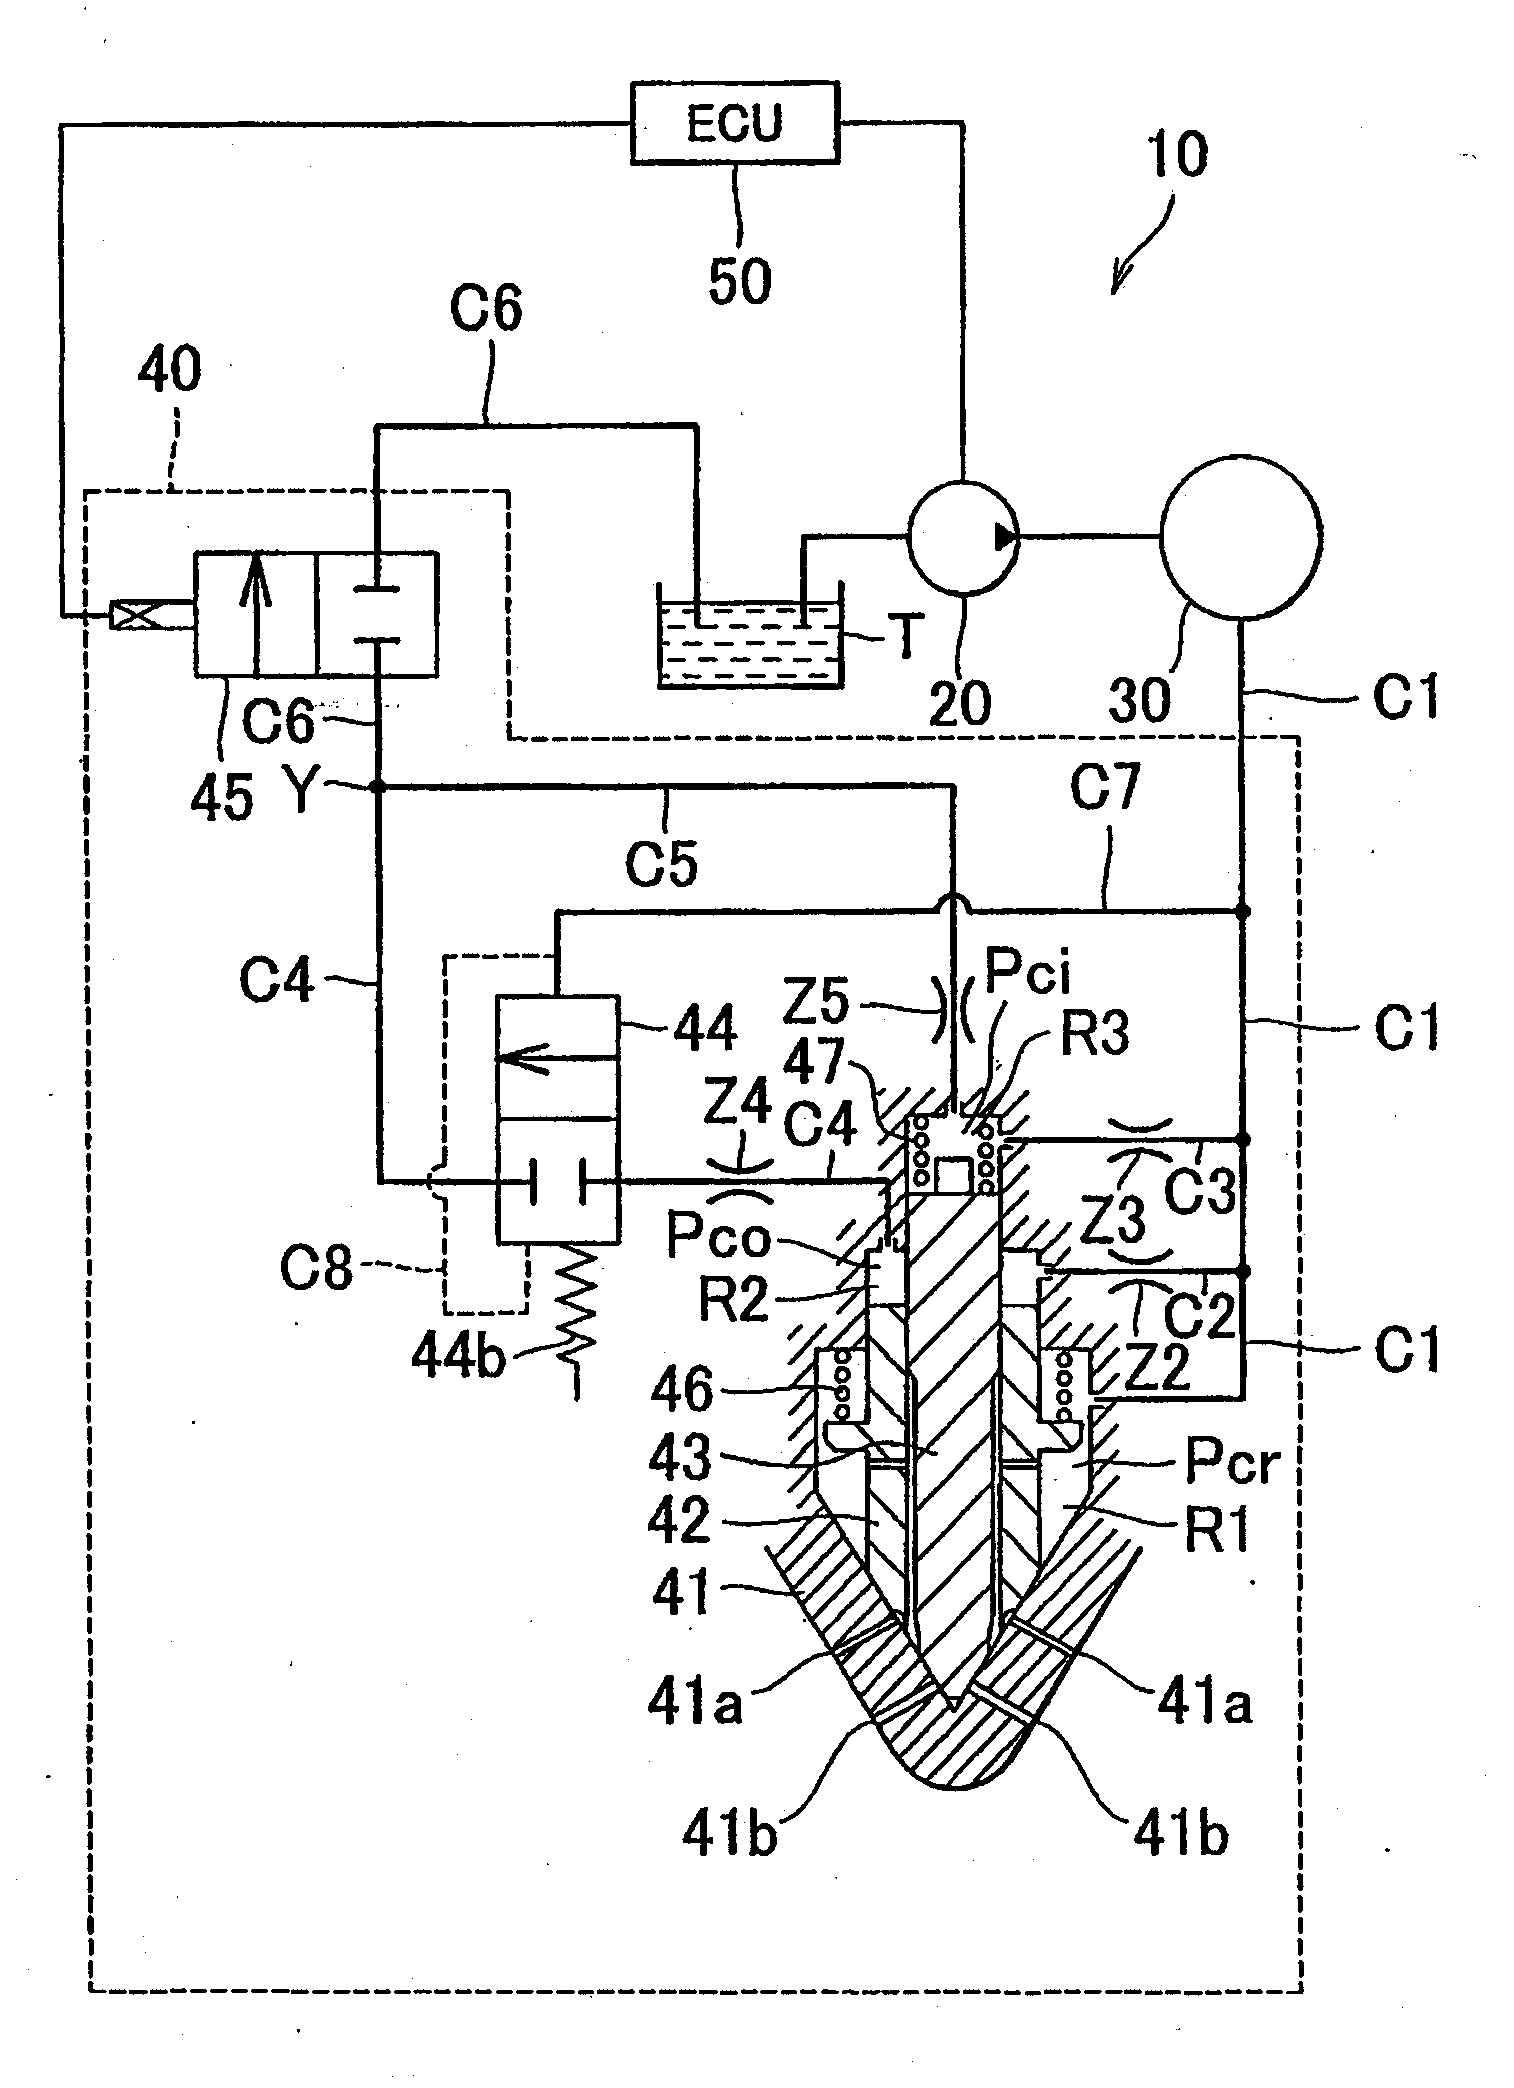 Fuel injection control device and method of controlling fuel injection for an internal combustion engine